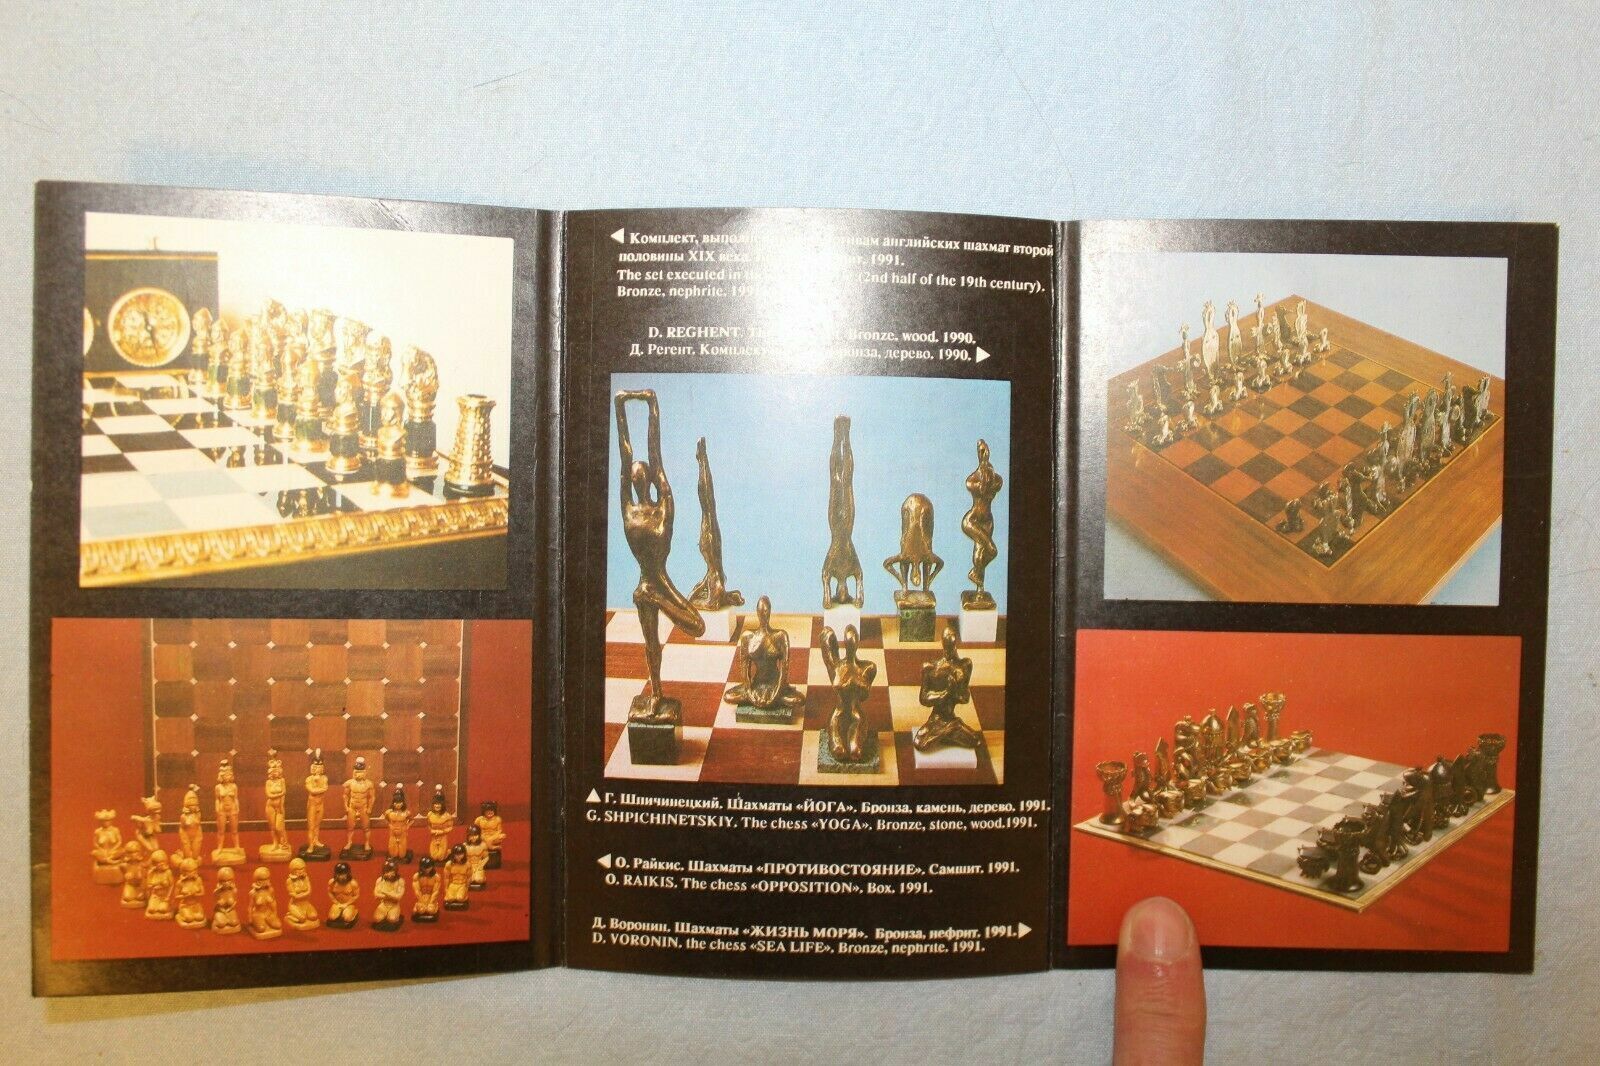 10693.2 Russian Booklets: Sculptur & Chess. Status Crosna Gallery